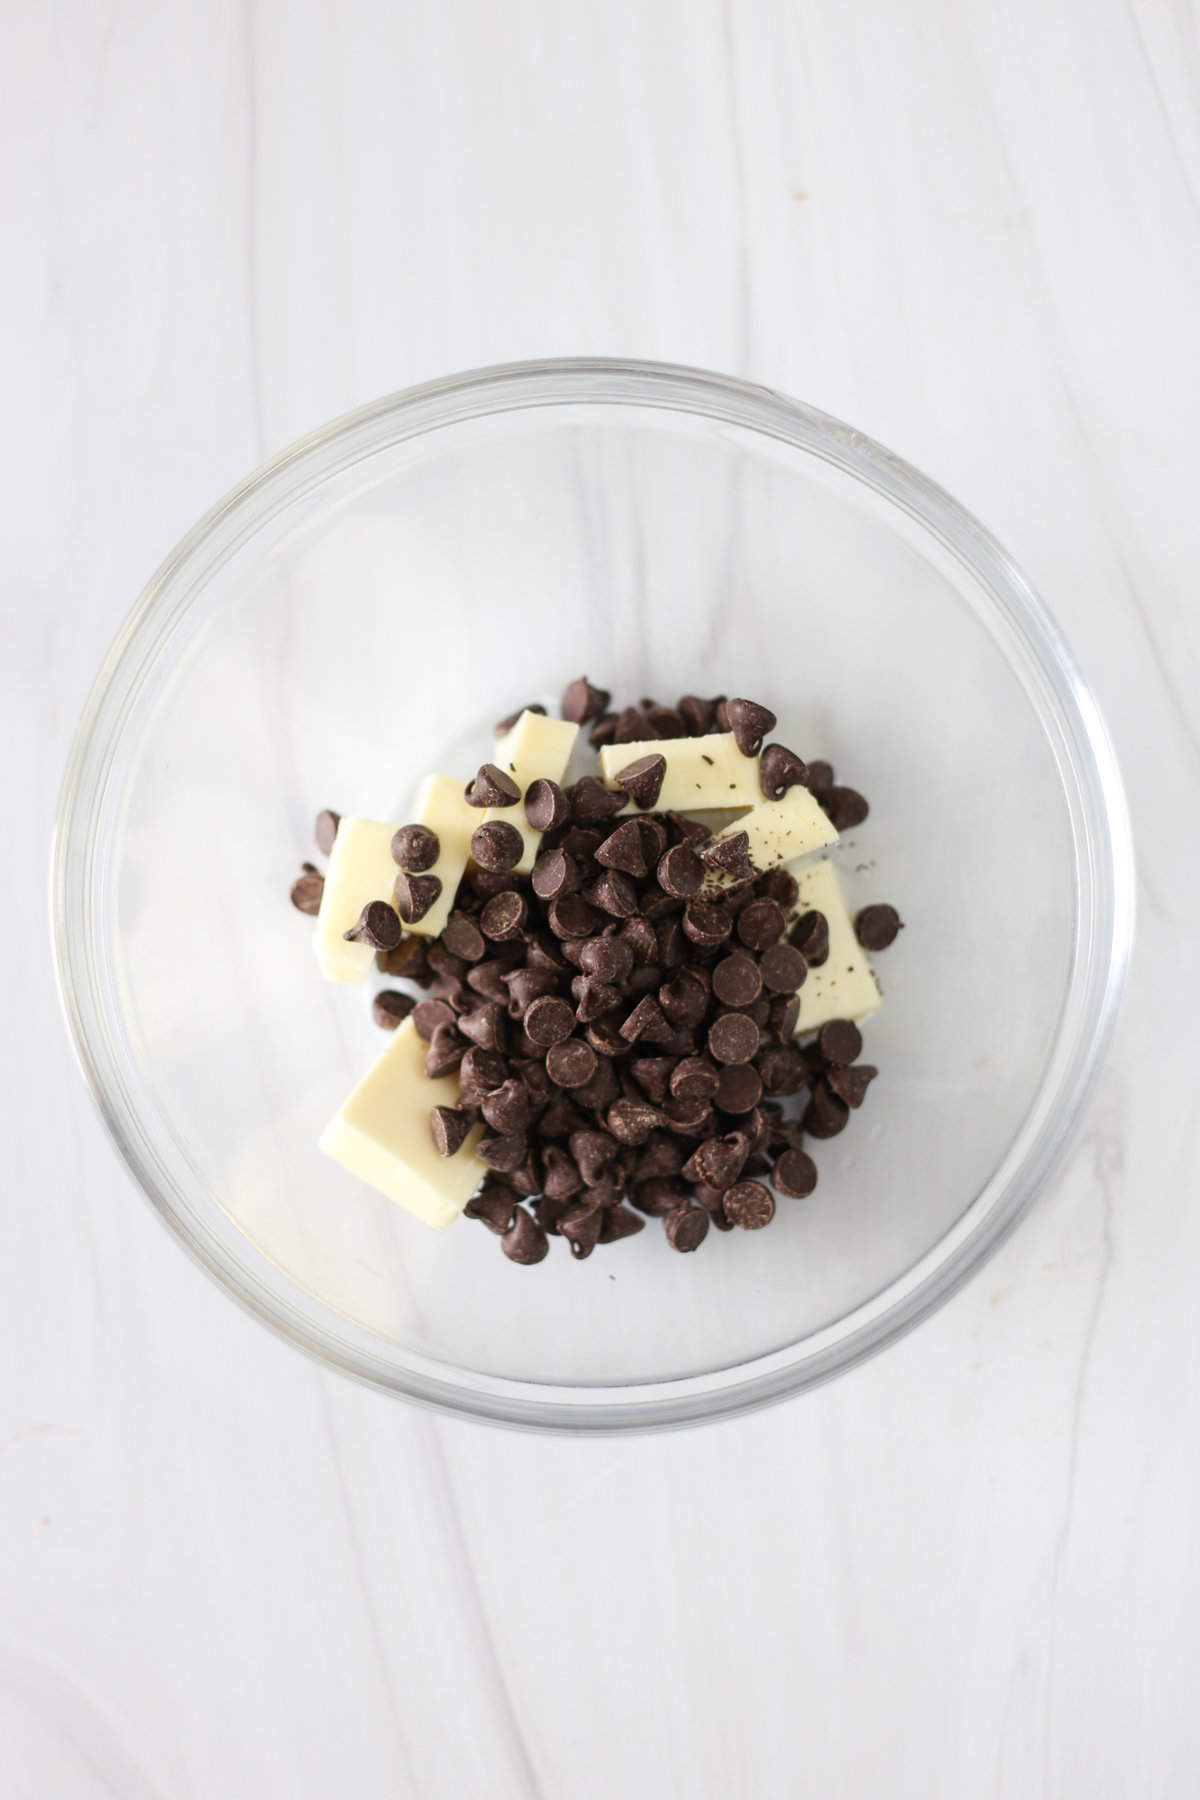 Chocolate chips and butter in a glass bowl ready to microwave.